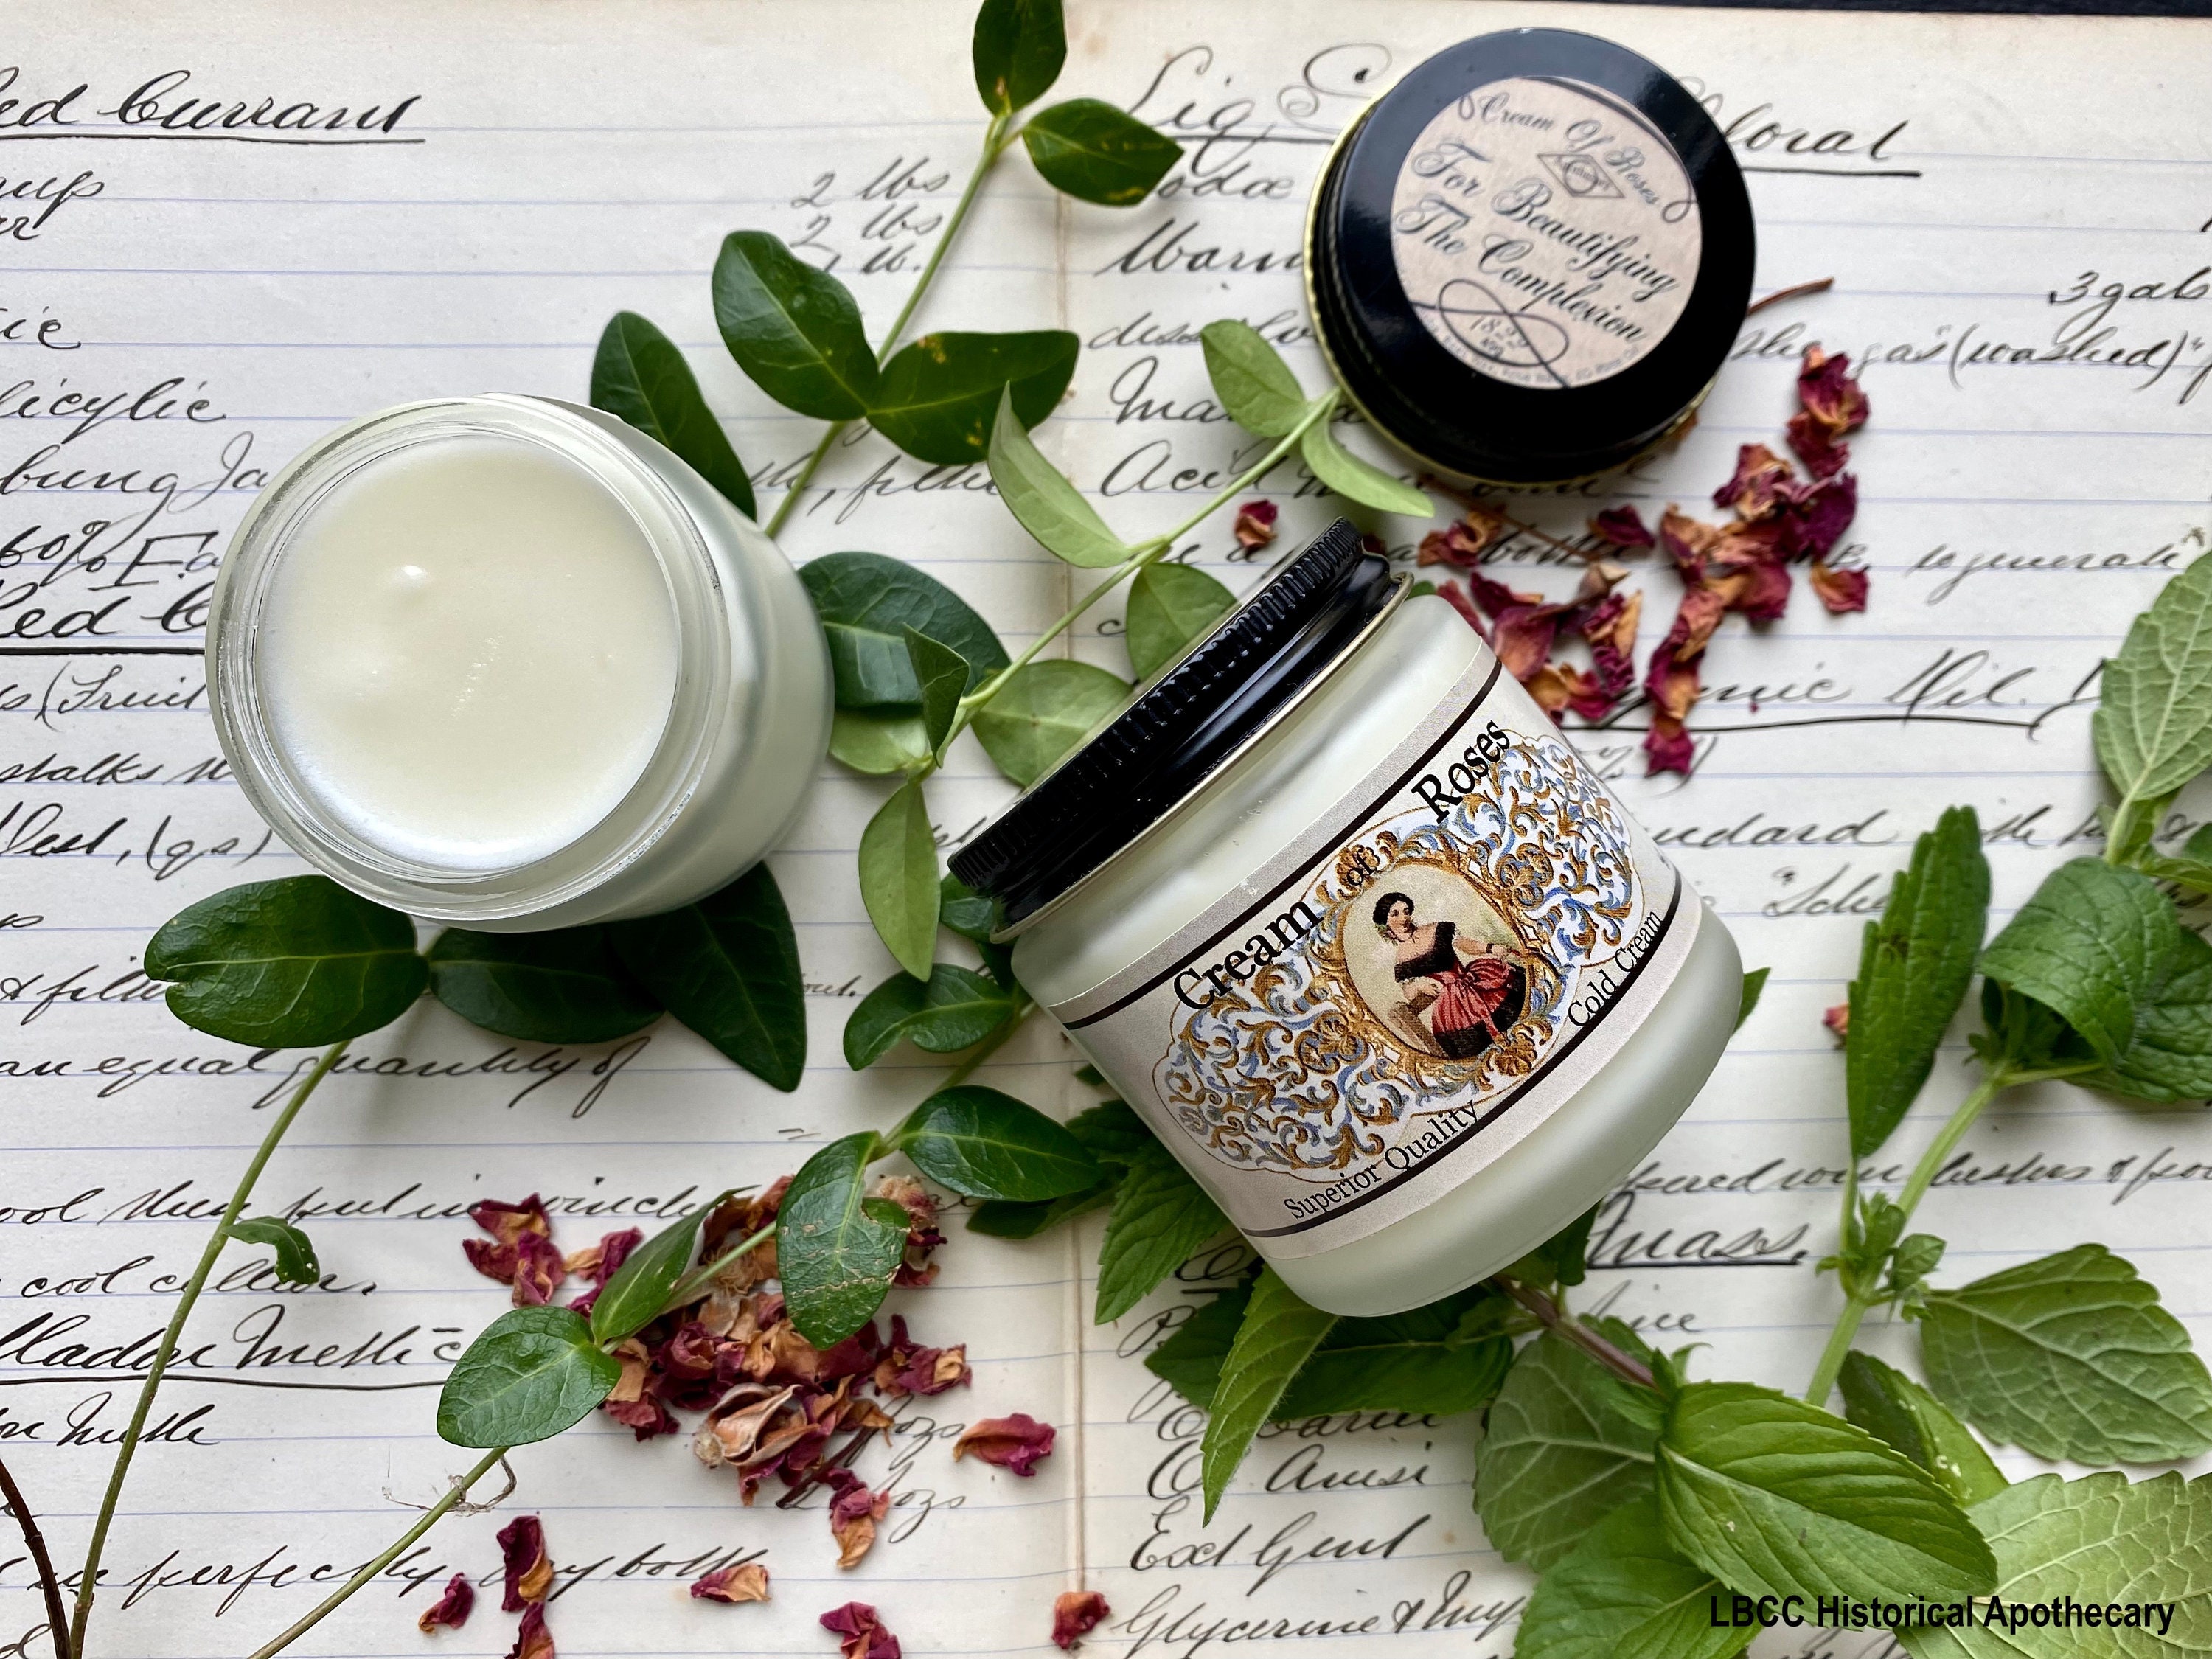 1822 Cream of Roses Rose Absolute Cold Cream Soft Skin Natural picture picture